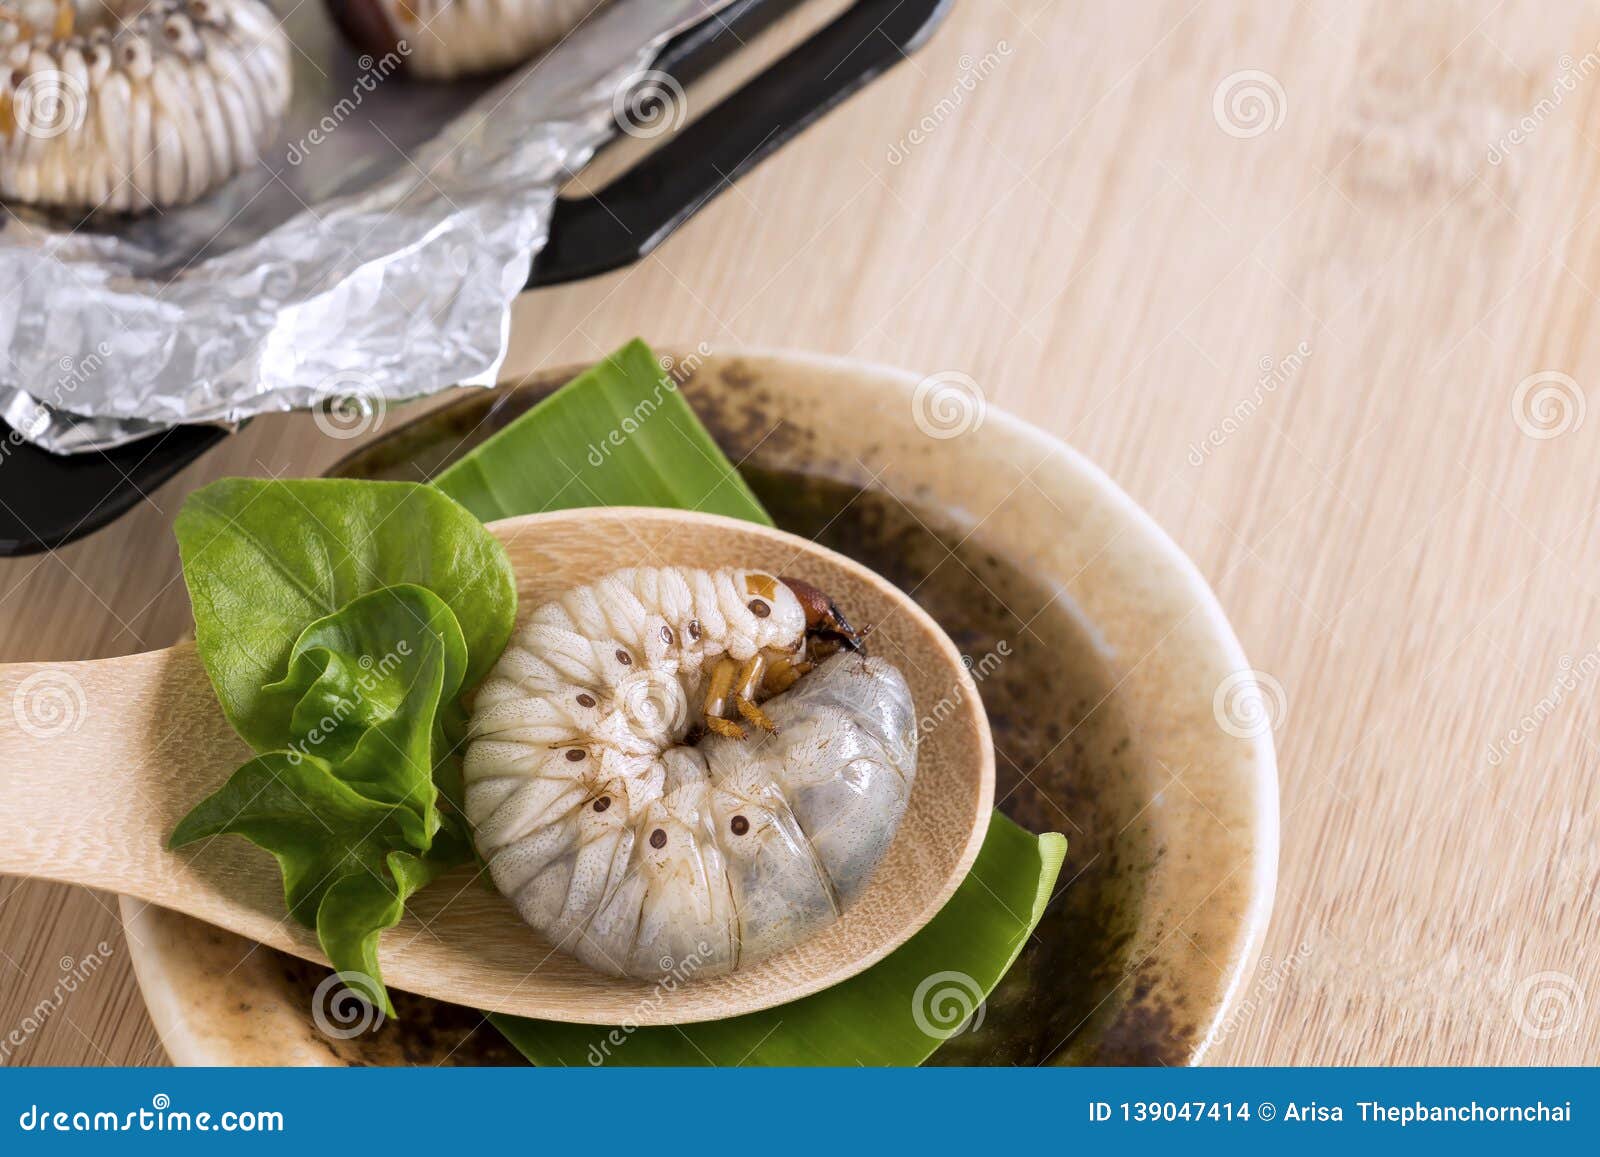 Grub Worms or Coconut Rhinoceros Beetle. Insects Food for Eating Larvae  Fried or Baked in Spoon with Vegetable on Plate and on Stock Photo - Image  of maggot, edible: 139047414